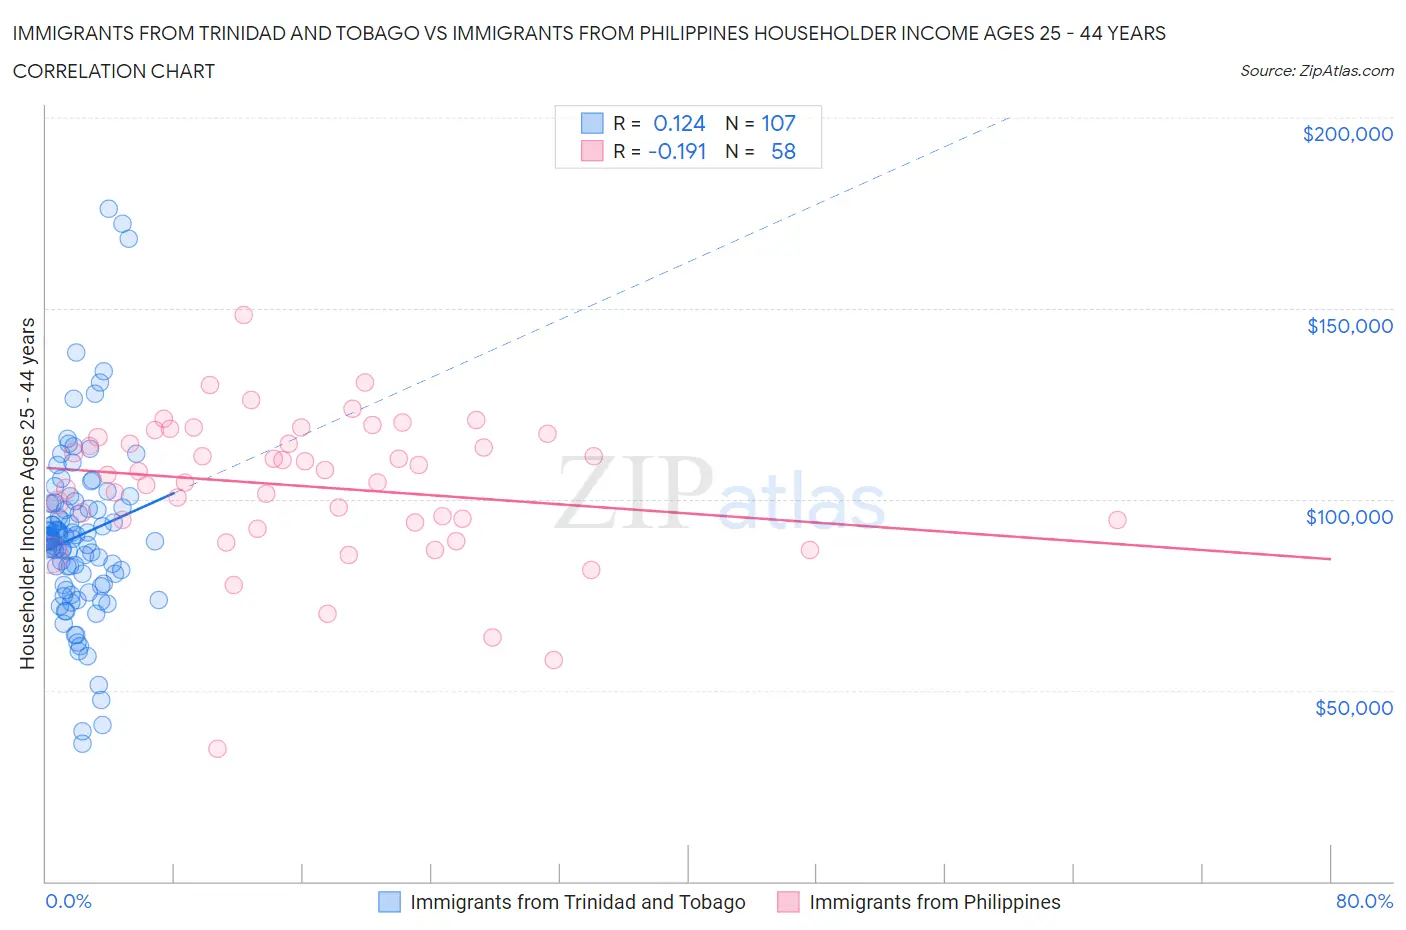 Immigrants from Trinidad and Tobago vs Immigrants from Philippines Householder Income Ages 25 - 44 years